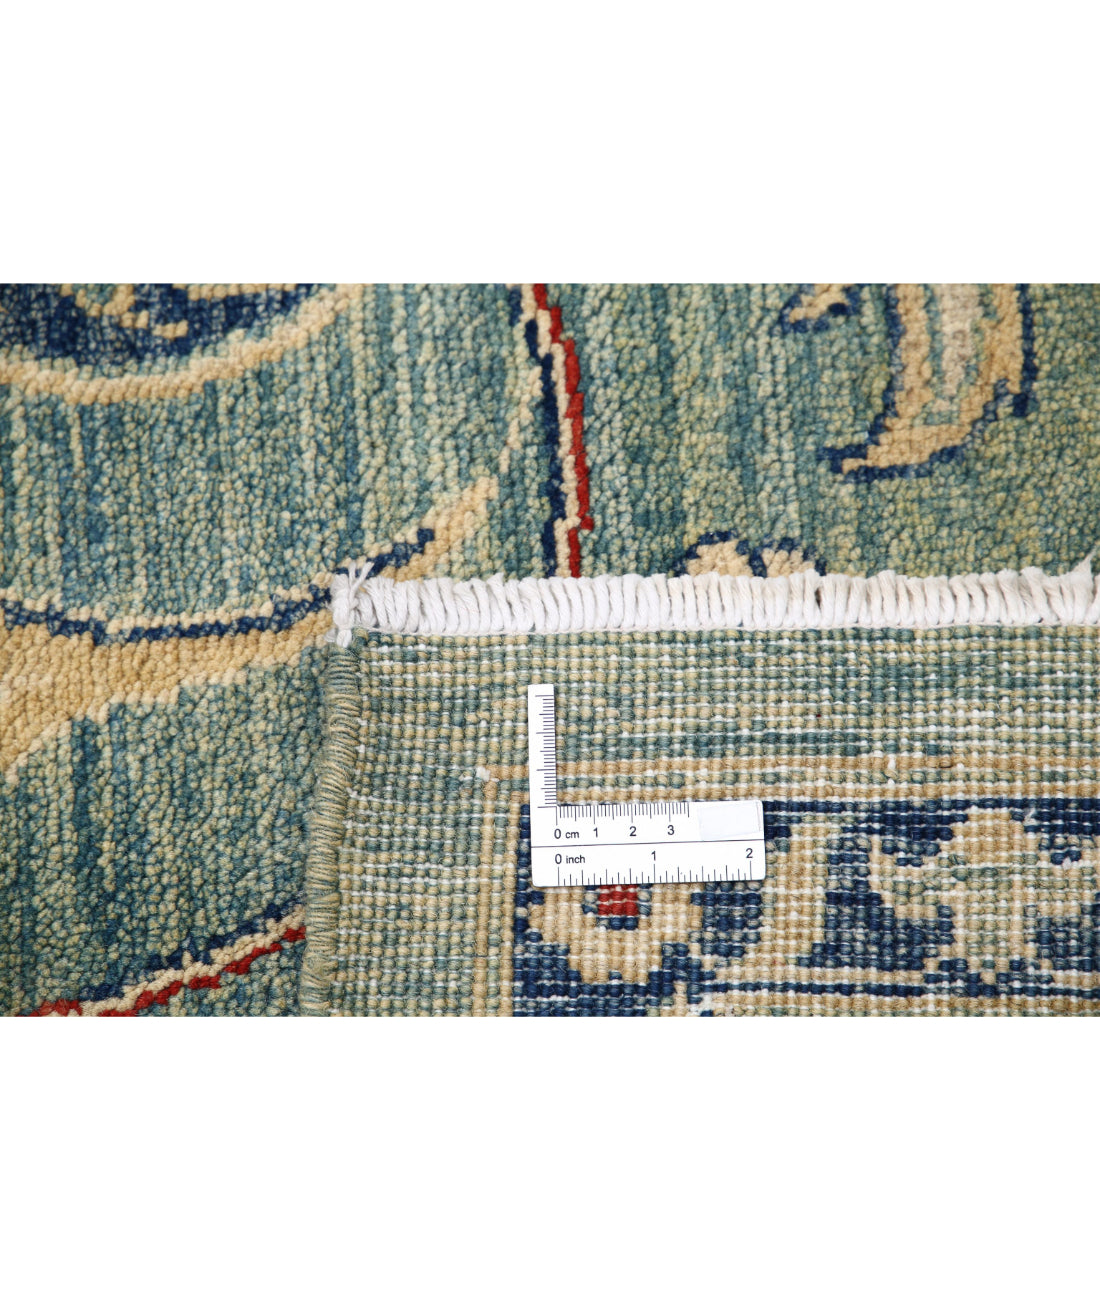 Ziegler 8'11'' X 12'3'' Hand-Knotted Wool Rug 8'11'' x 12'3'' (268 X 368) / Green / N/A